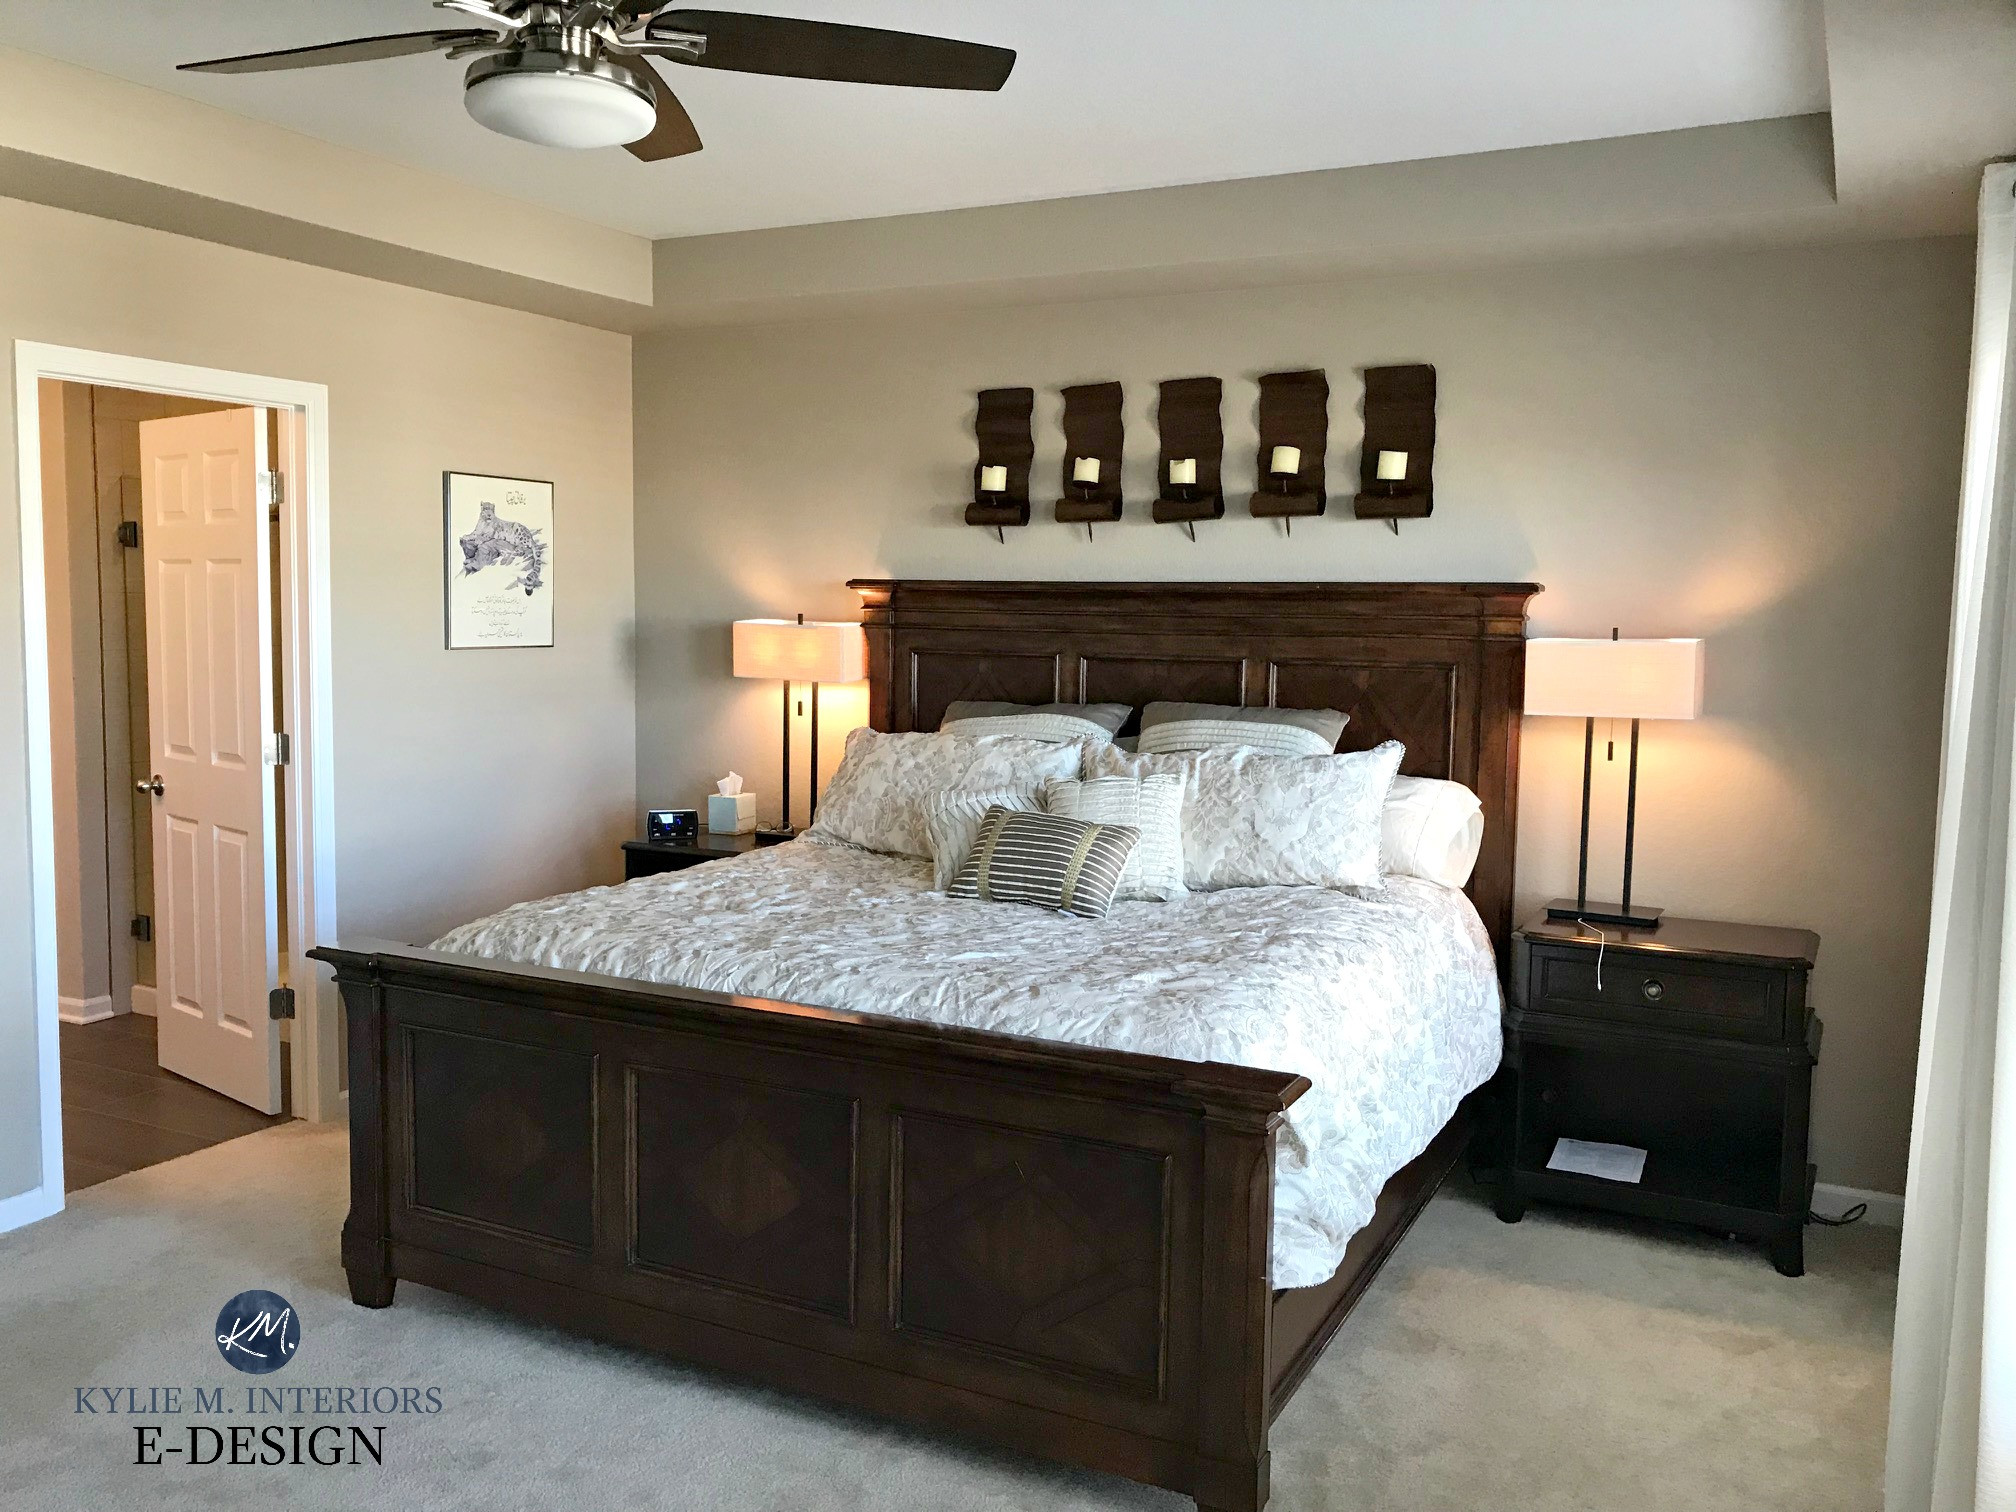 Neutral Paint Colors For Bedrooms
 Sherwin Williams Barcelona Beige best neutral paint